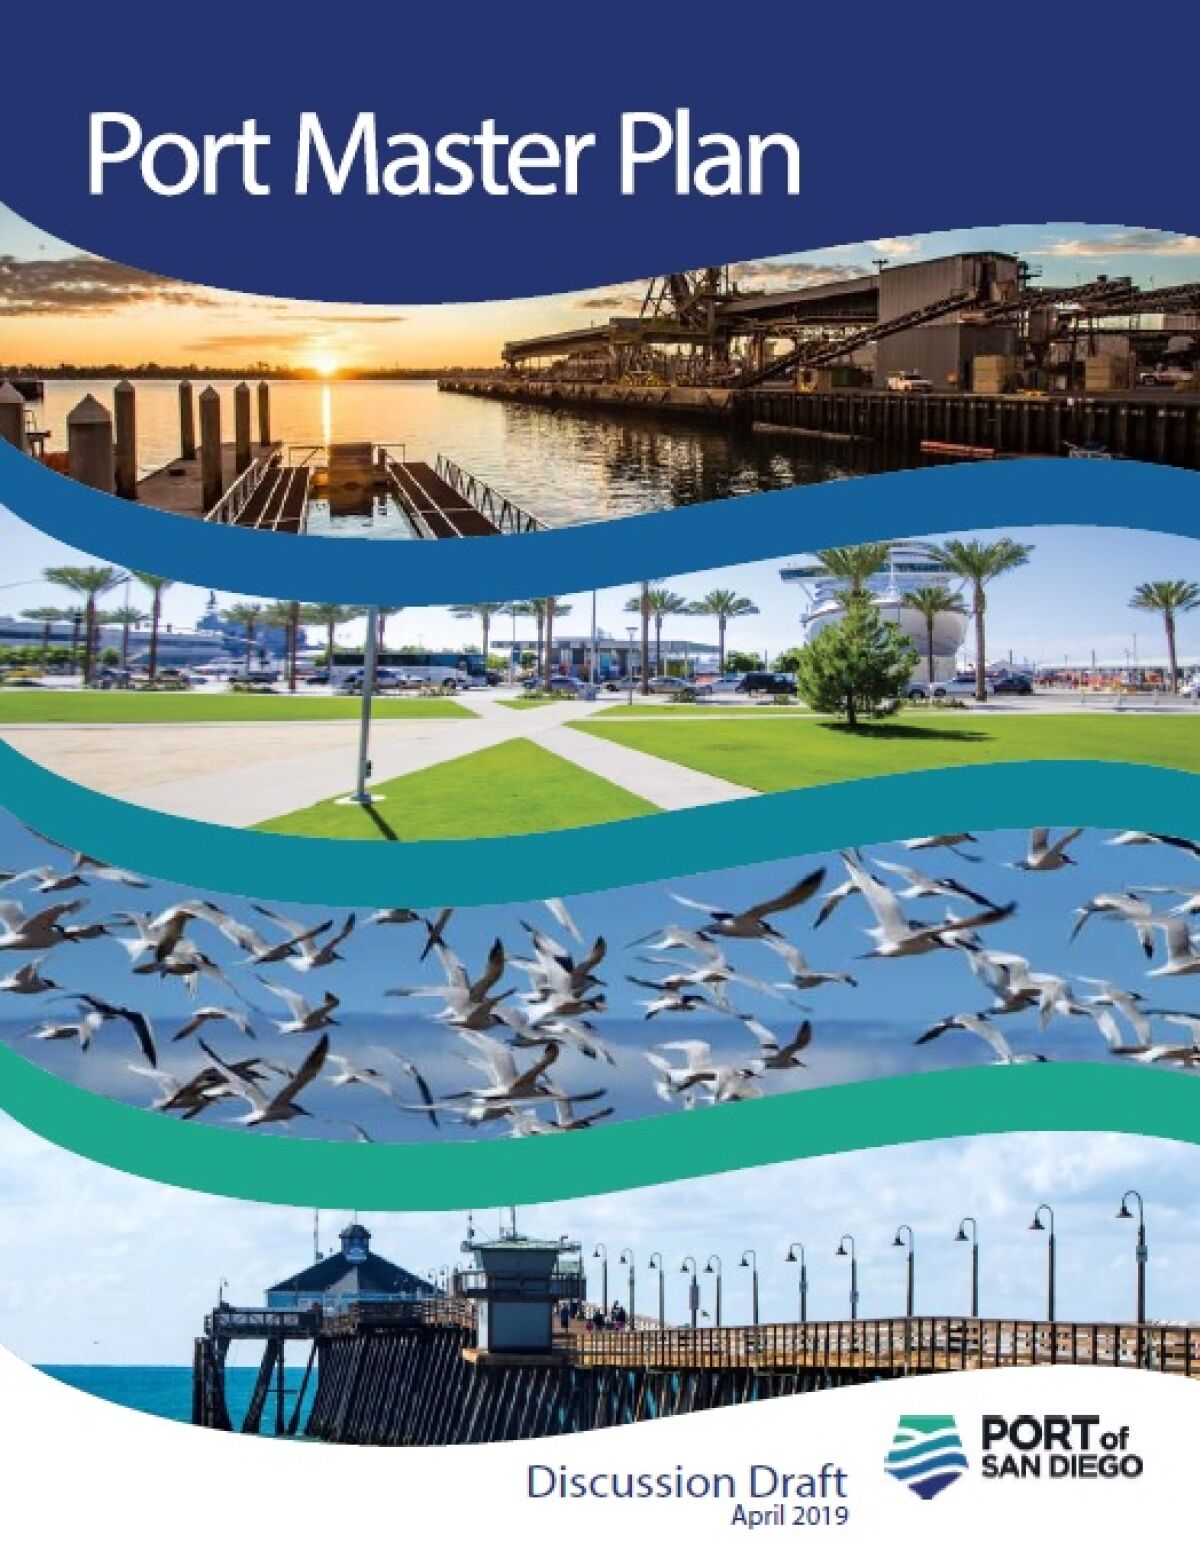 The Port of San Diego Master Plan serves as the primary tool to guide water and land uses and development on Port District lands, tidelands and submerged lands. The original was adopted by the Board of Port Commissioners in January 1964. The Port District runs 34 miles along San Diego Bay, spanning five cities. Find the Master Plan Discussion Draft online at bit.ly/PortofSDDraft